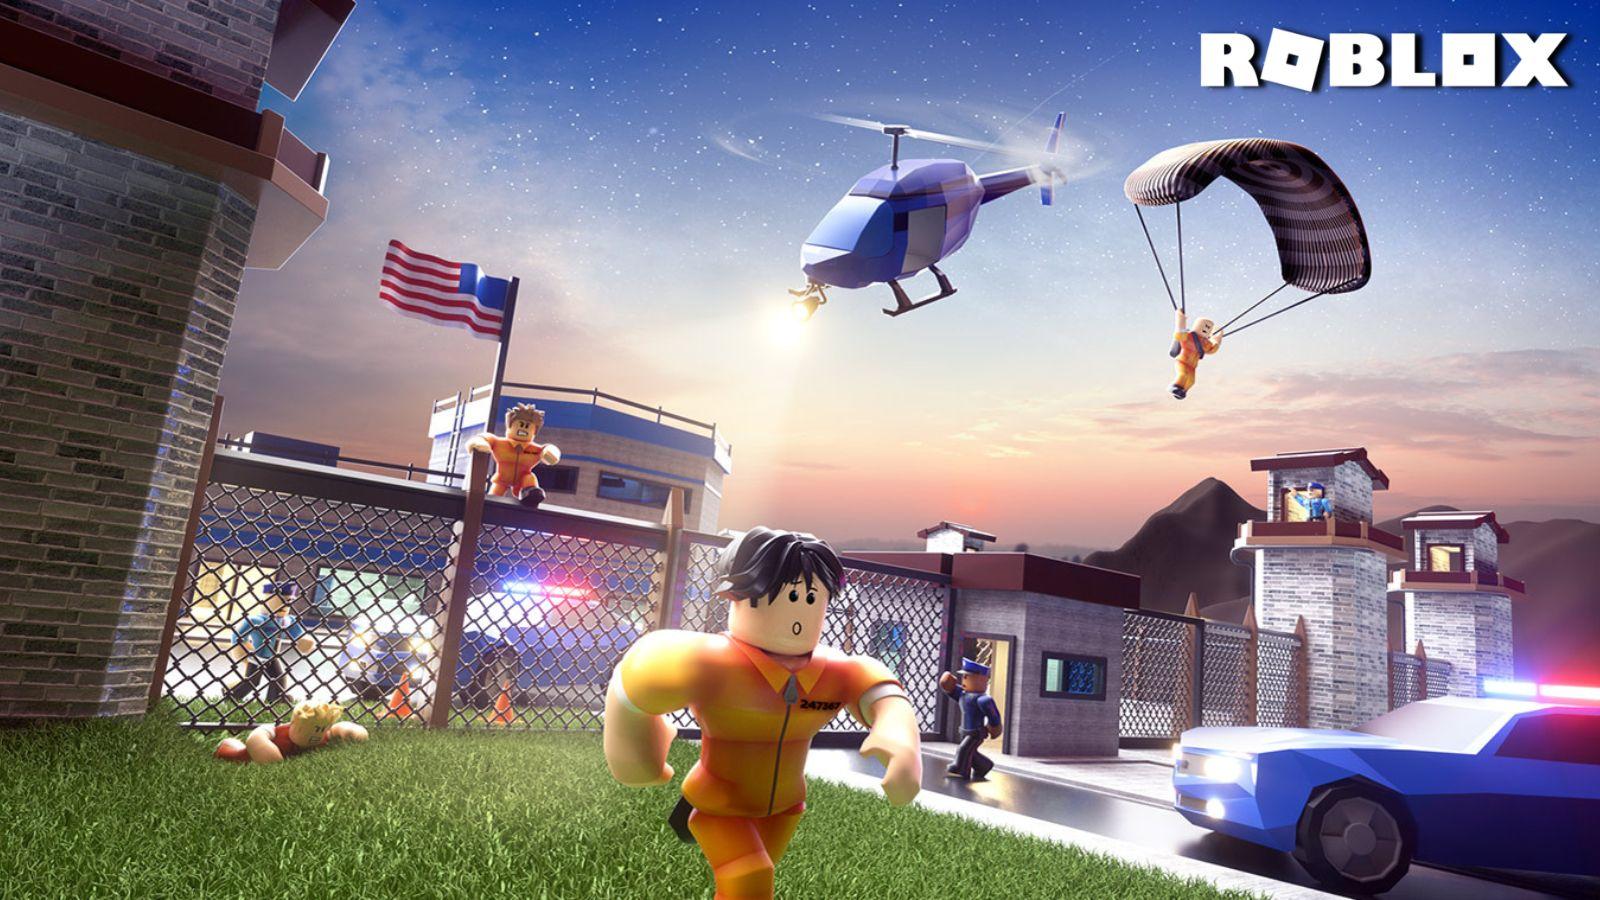 Roblox rolls out new anti-cheat software Hyperion